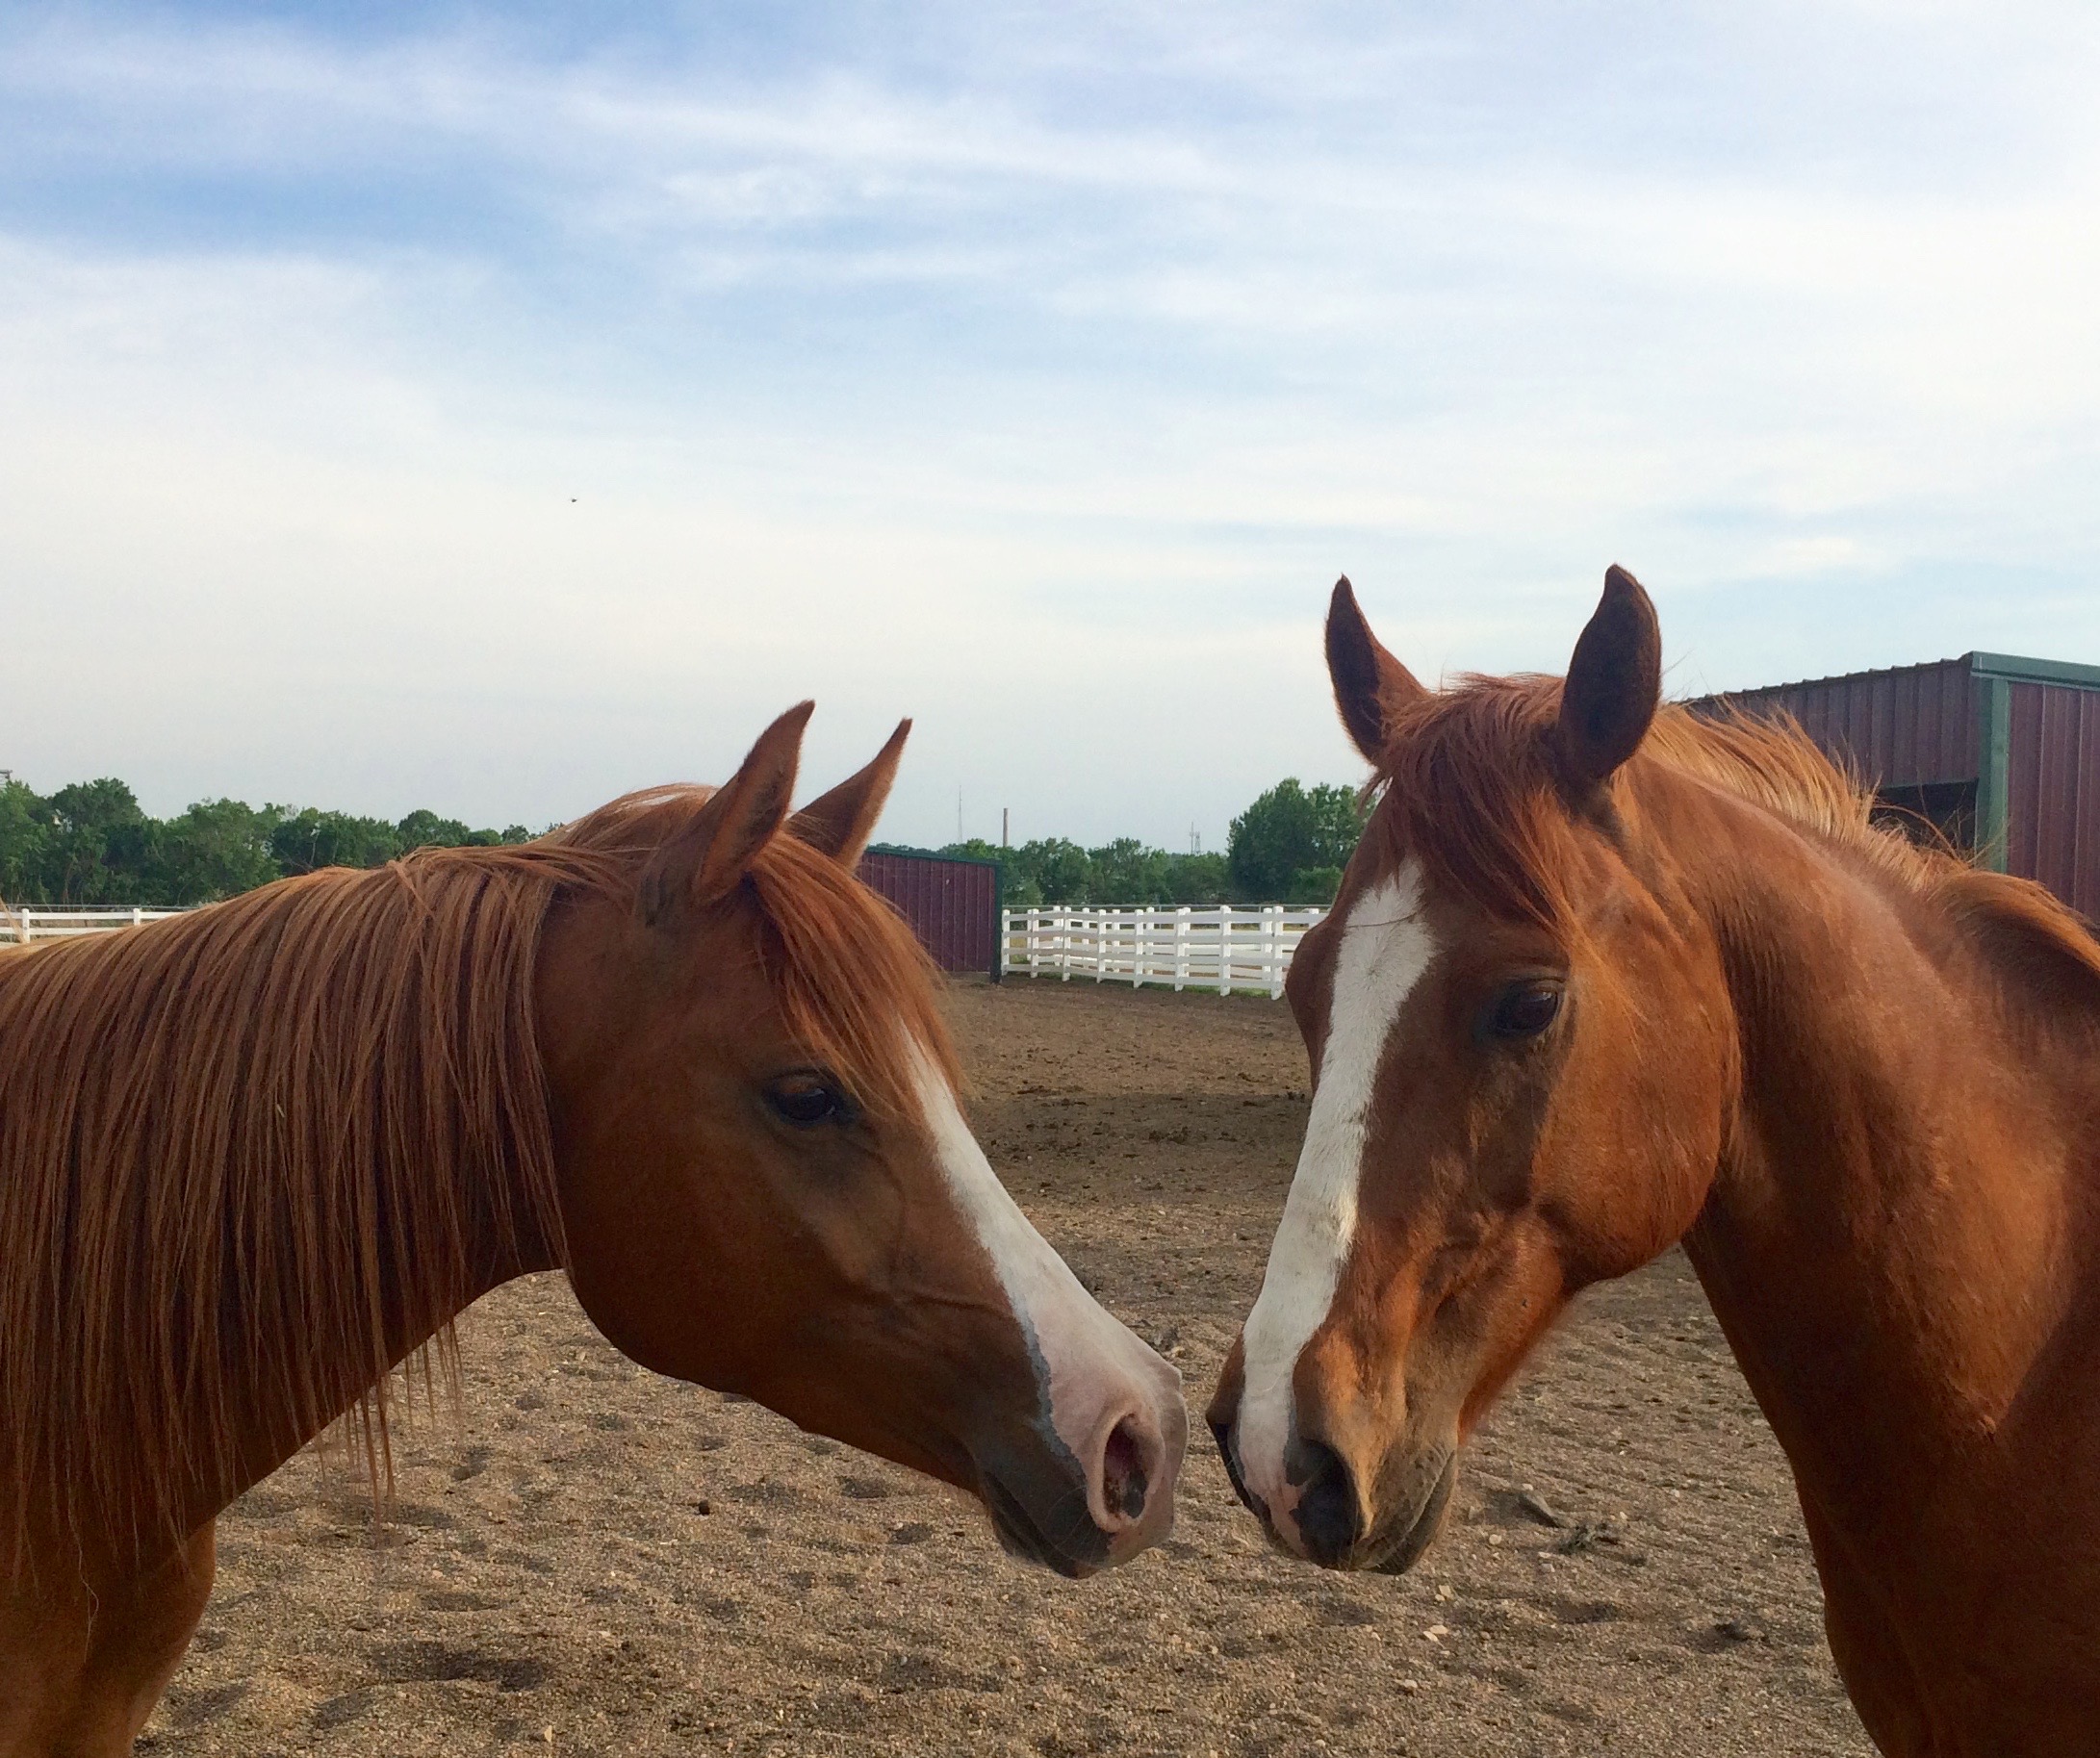 Two horses stand nose-to-nose in an outdoor pasture setting 